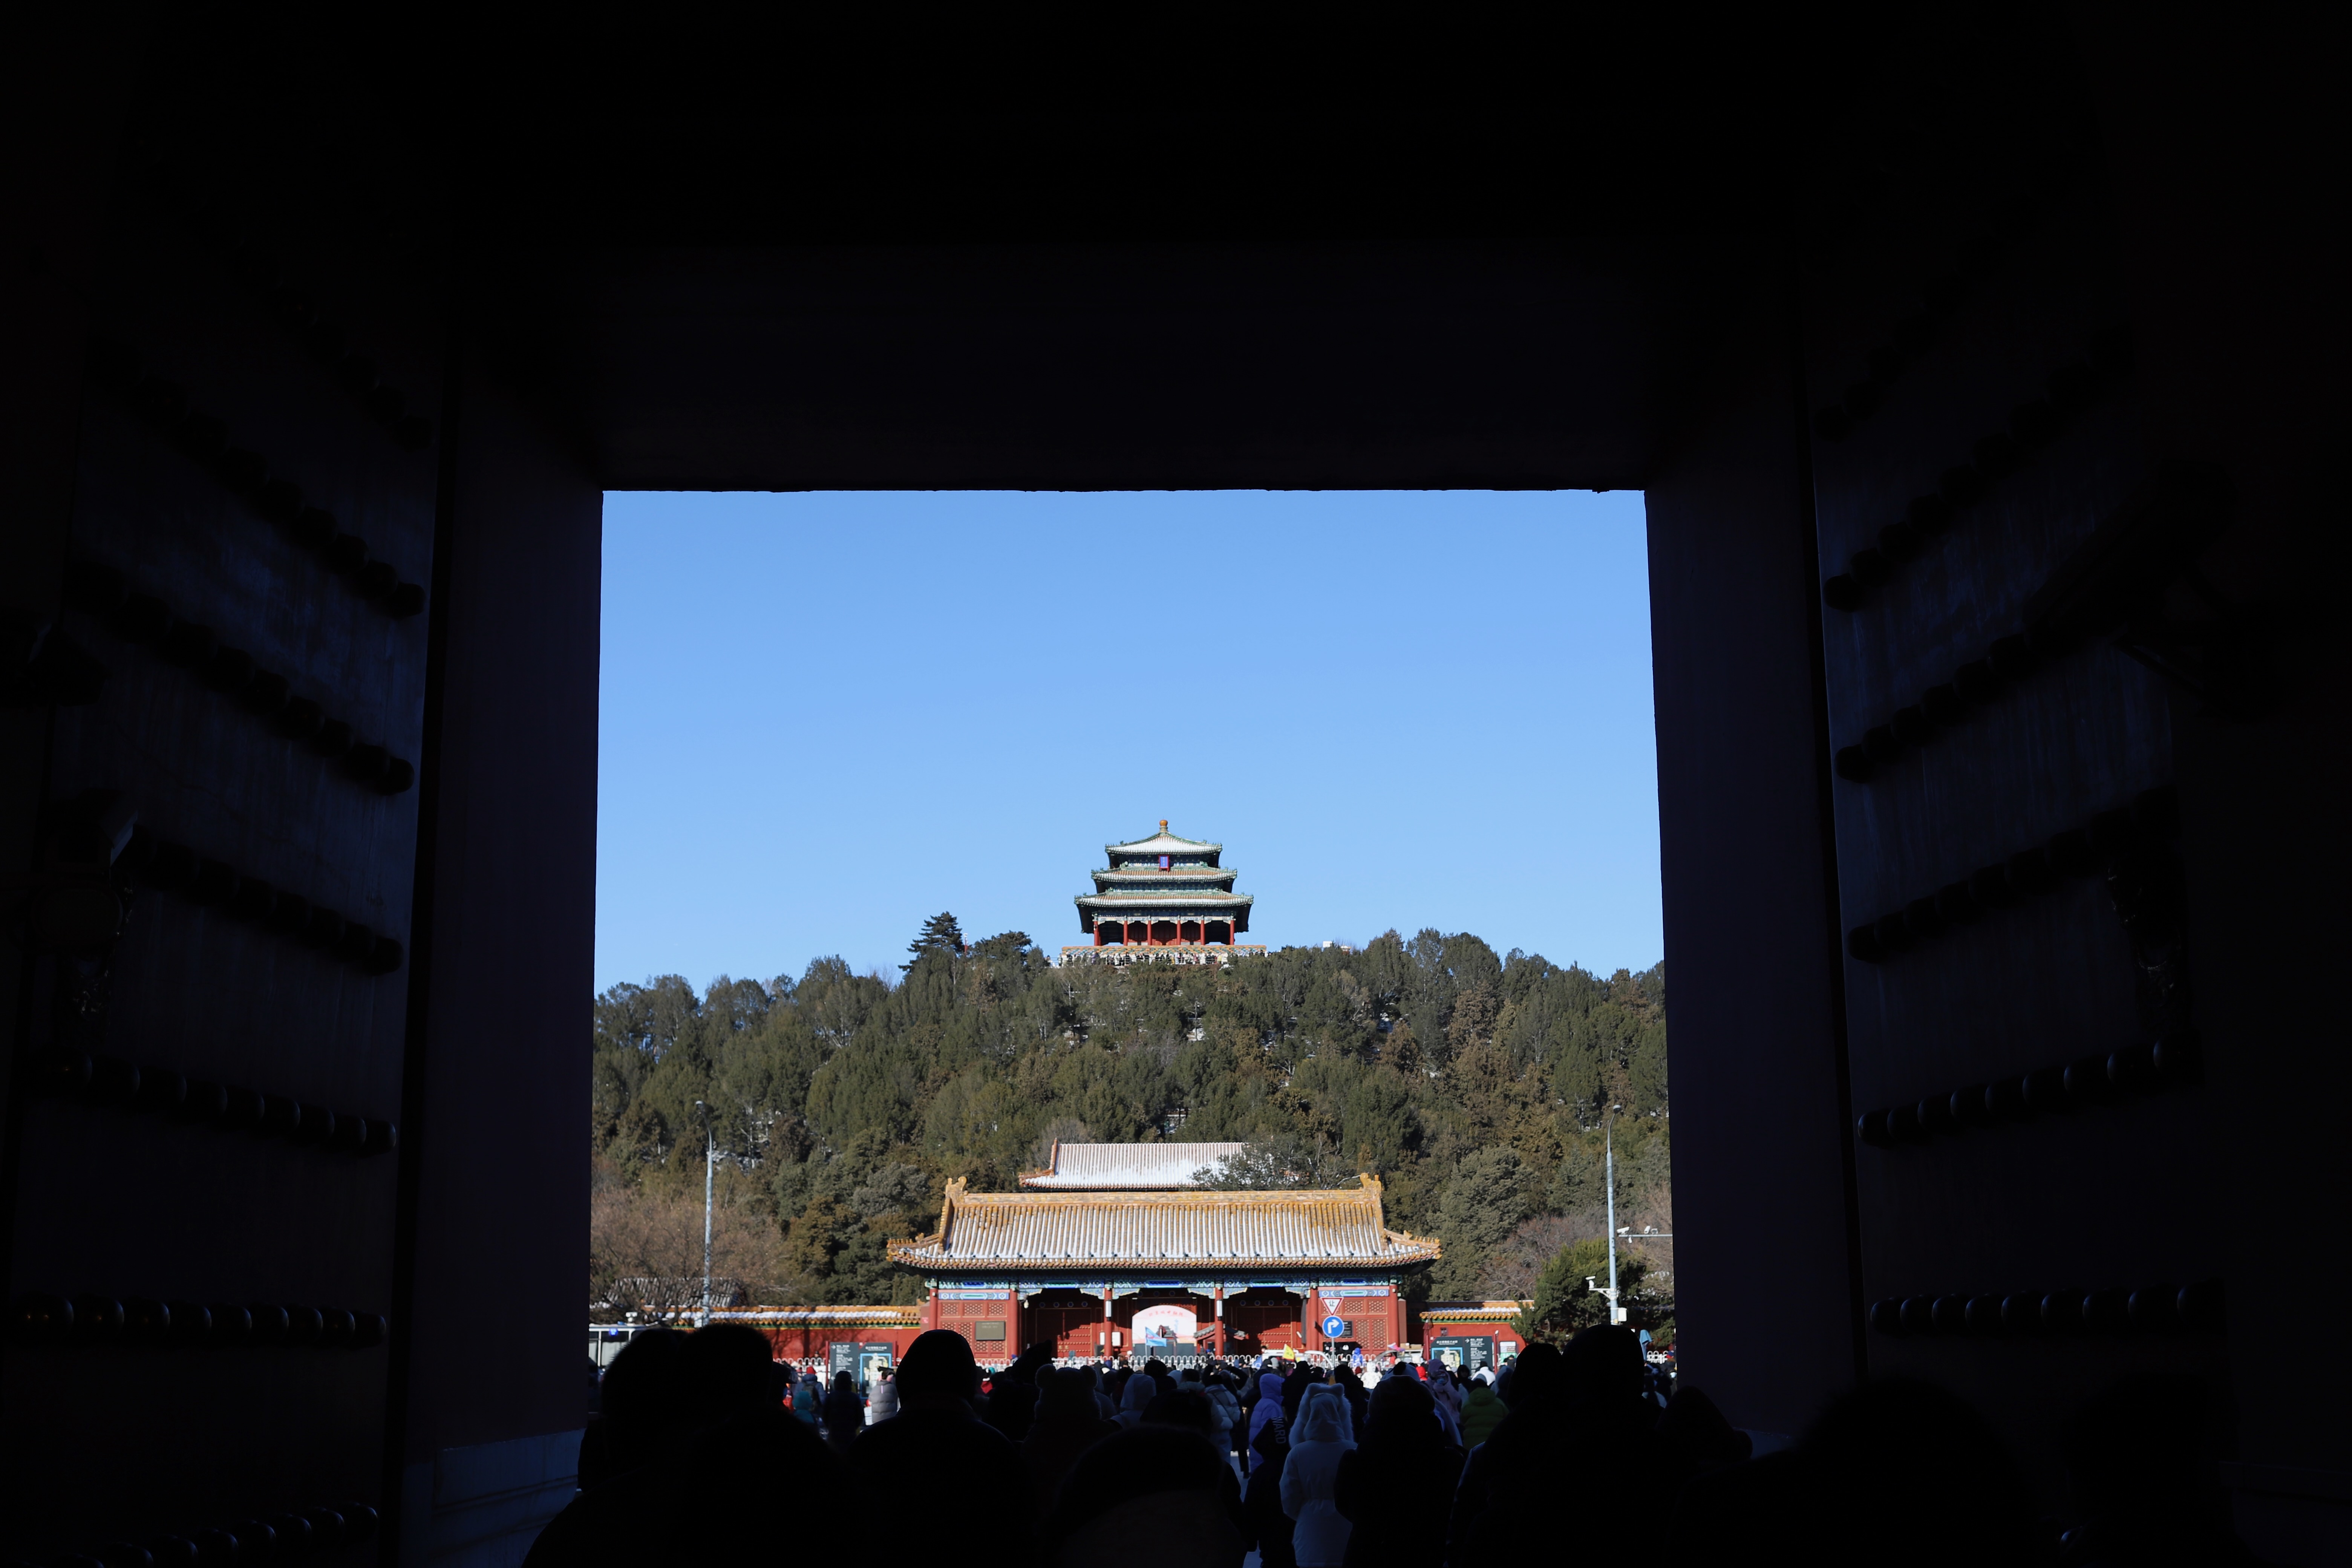 Looking up at Jingshan Park from the north gate of the Forbidden City.